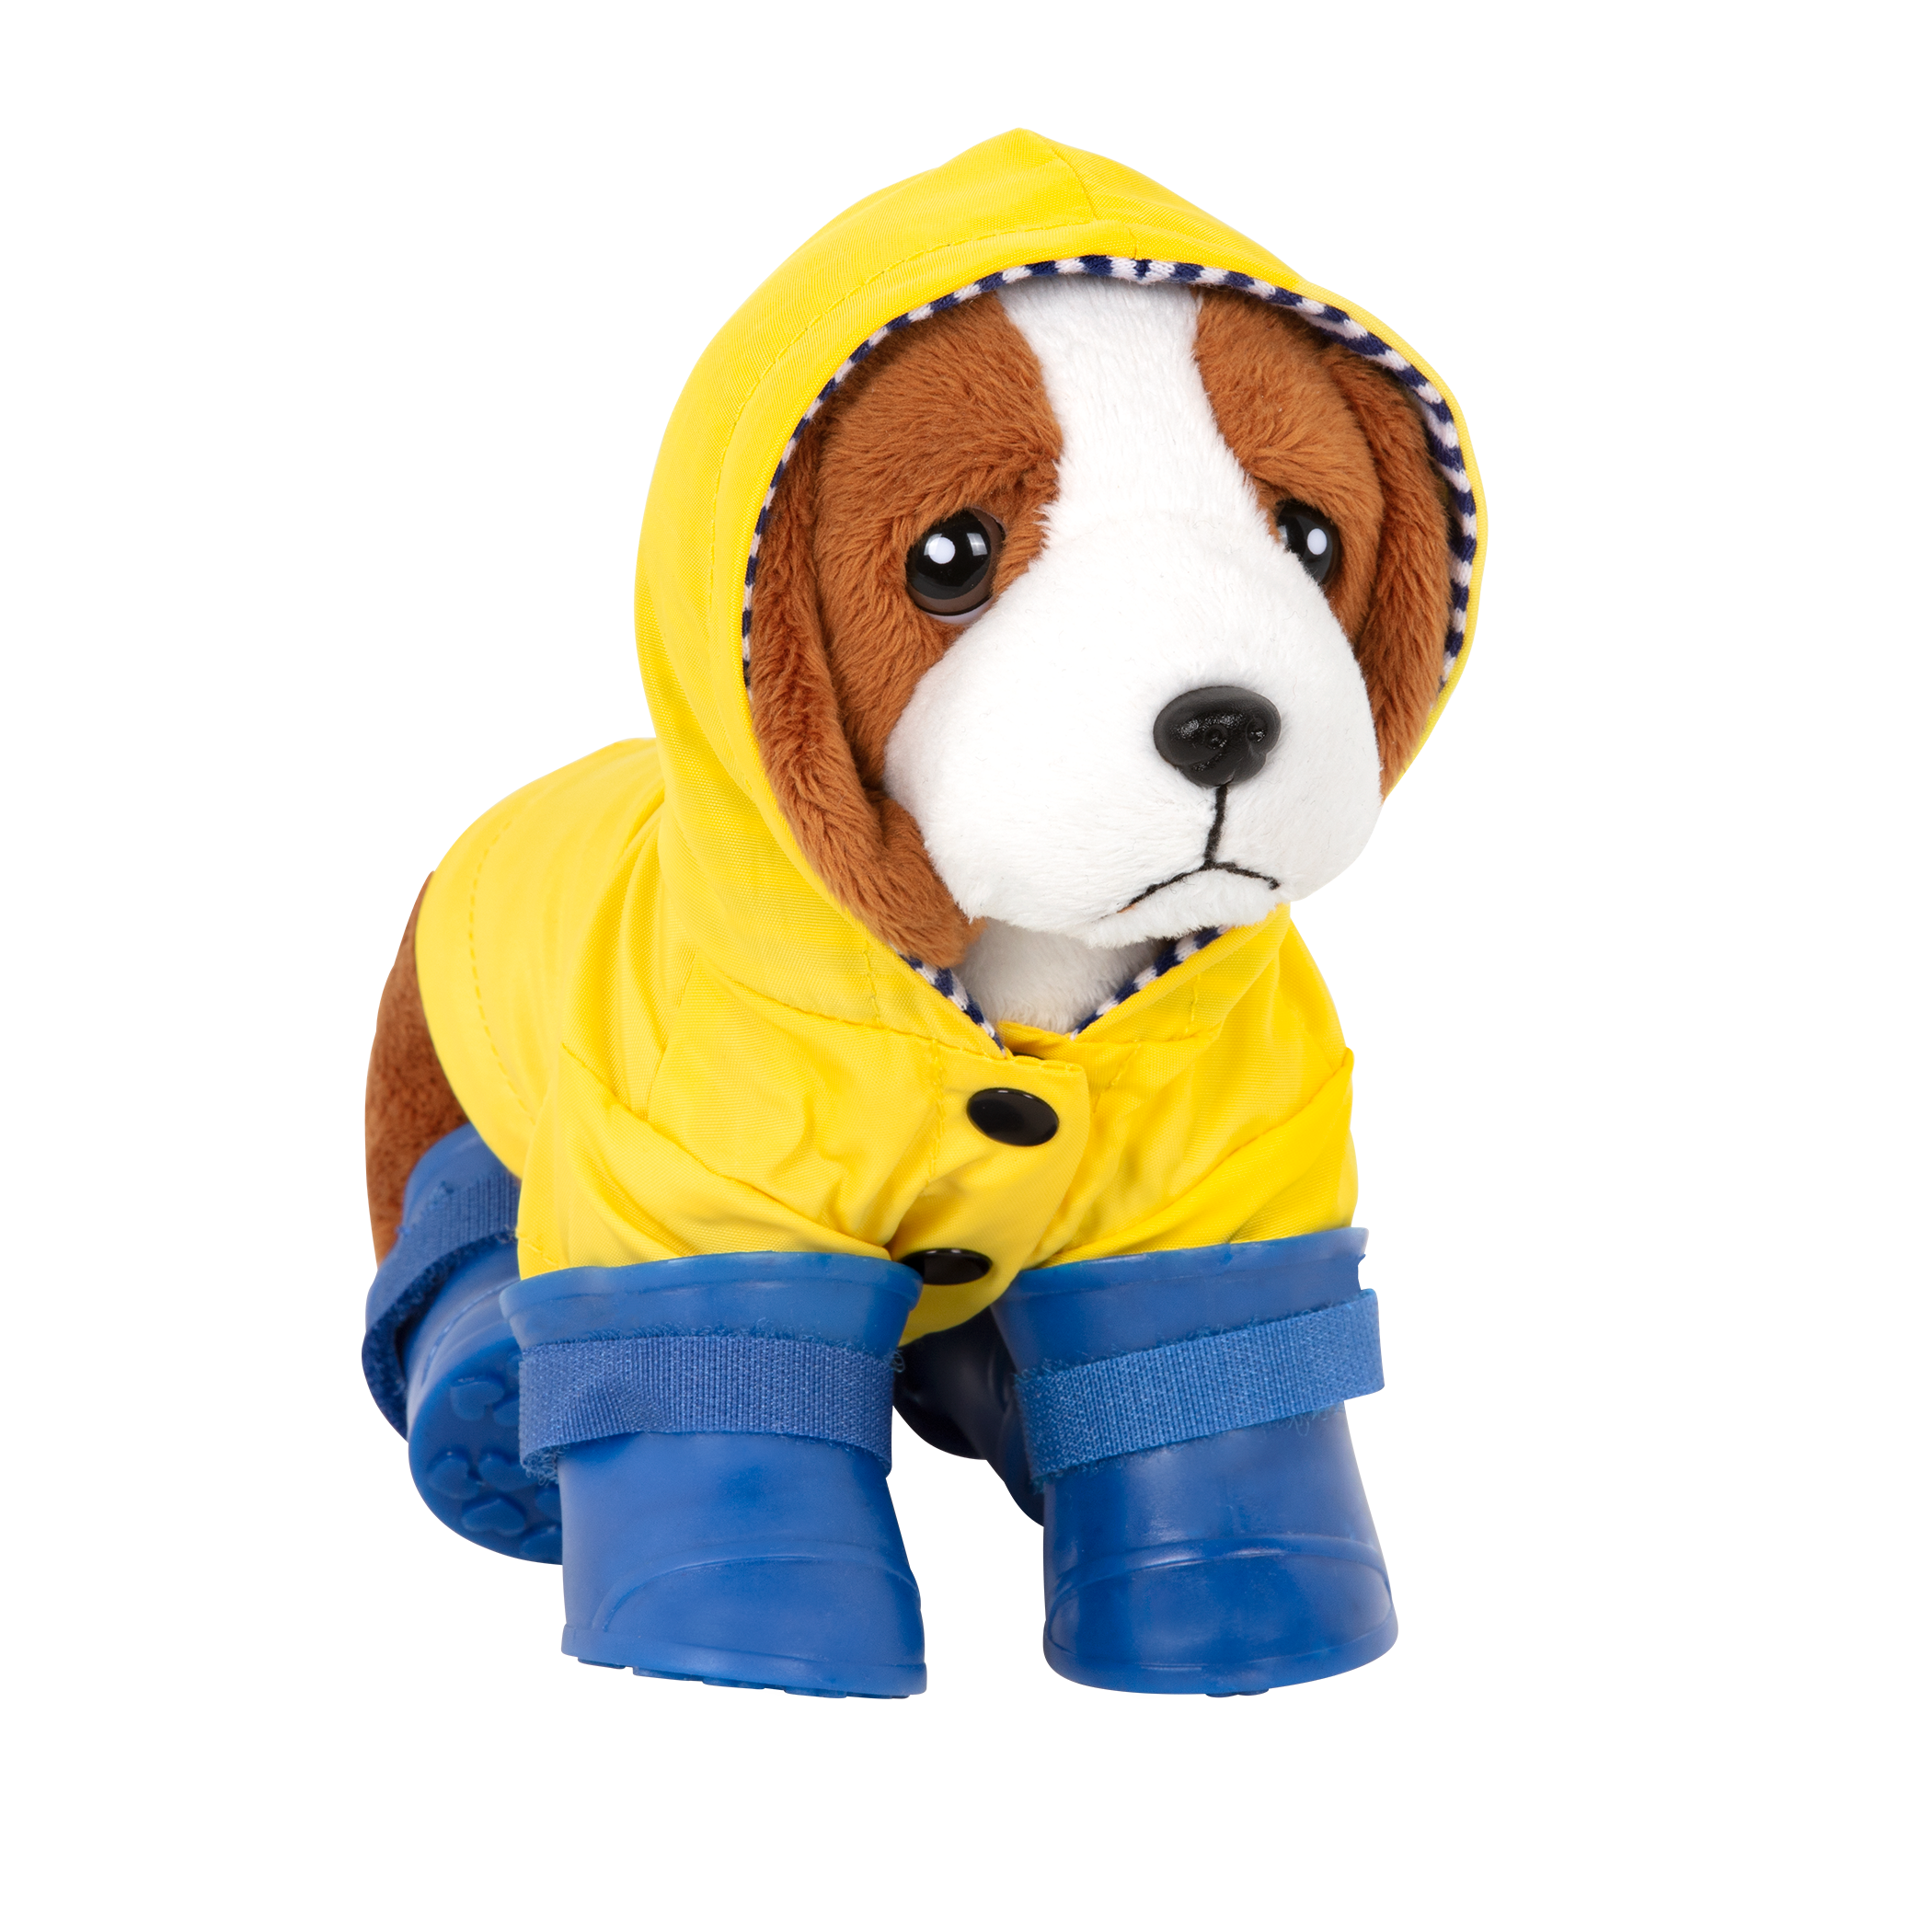 Paws N' Puddles Rainy Day Outfit for 6-inch Plush Dogs